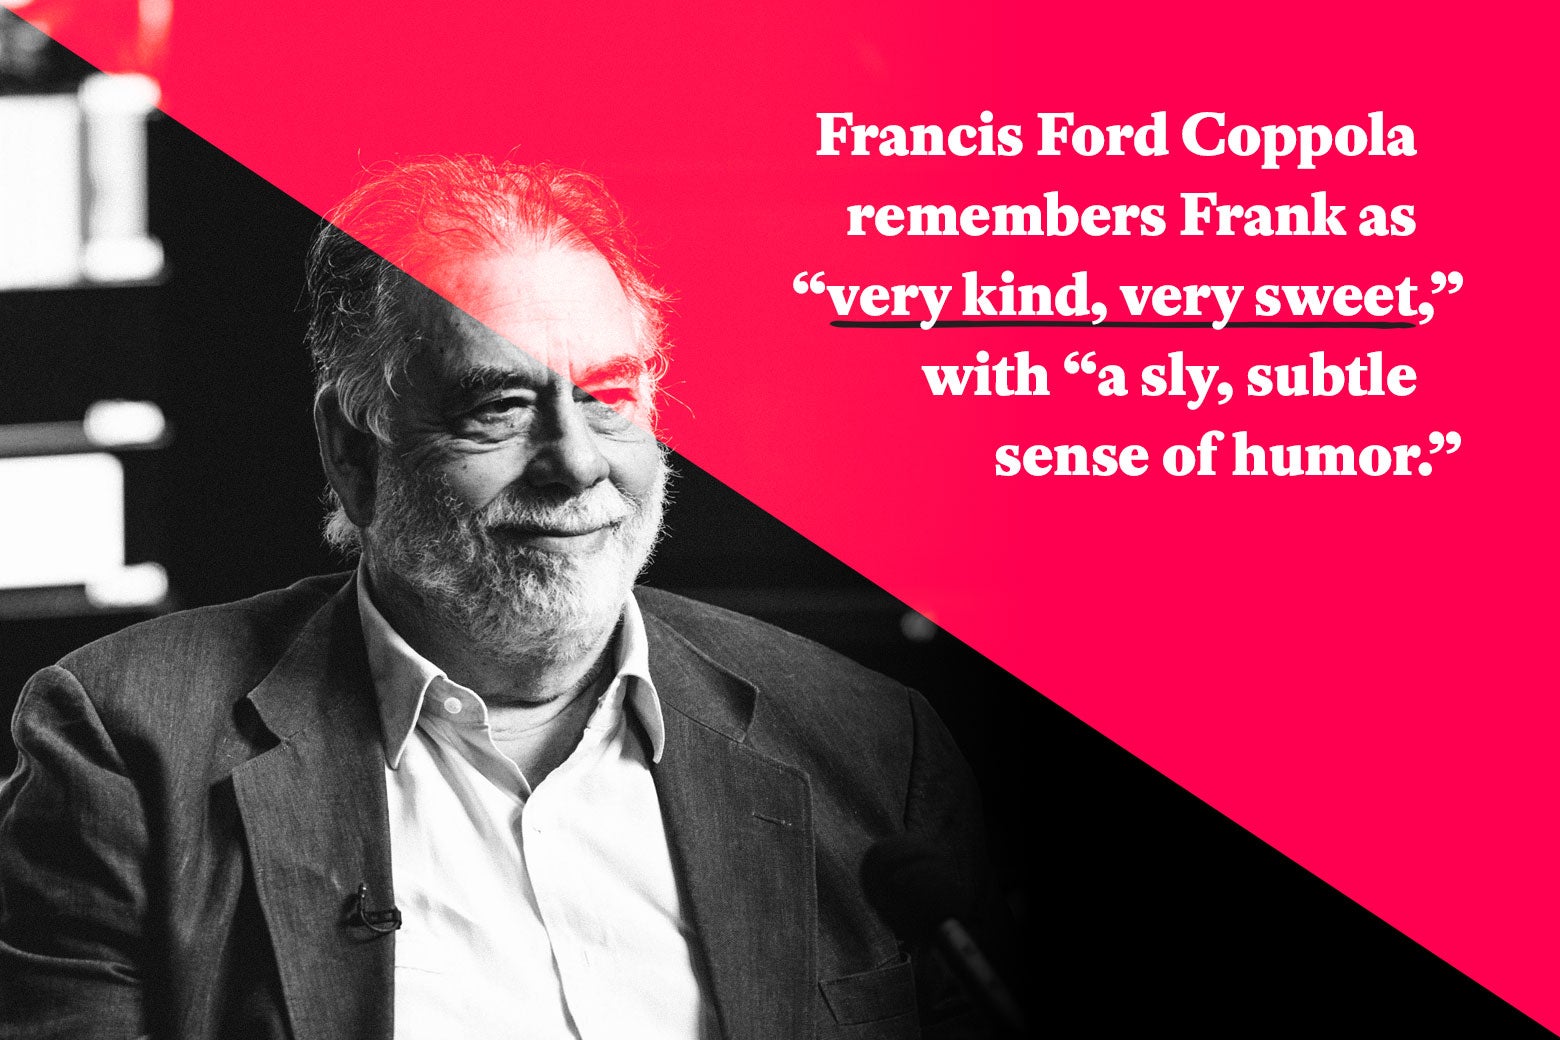 Francis Ford Coppola remembers Frank as “very kind, very sweet,” with “a sly, subtle sense of humor.”